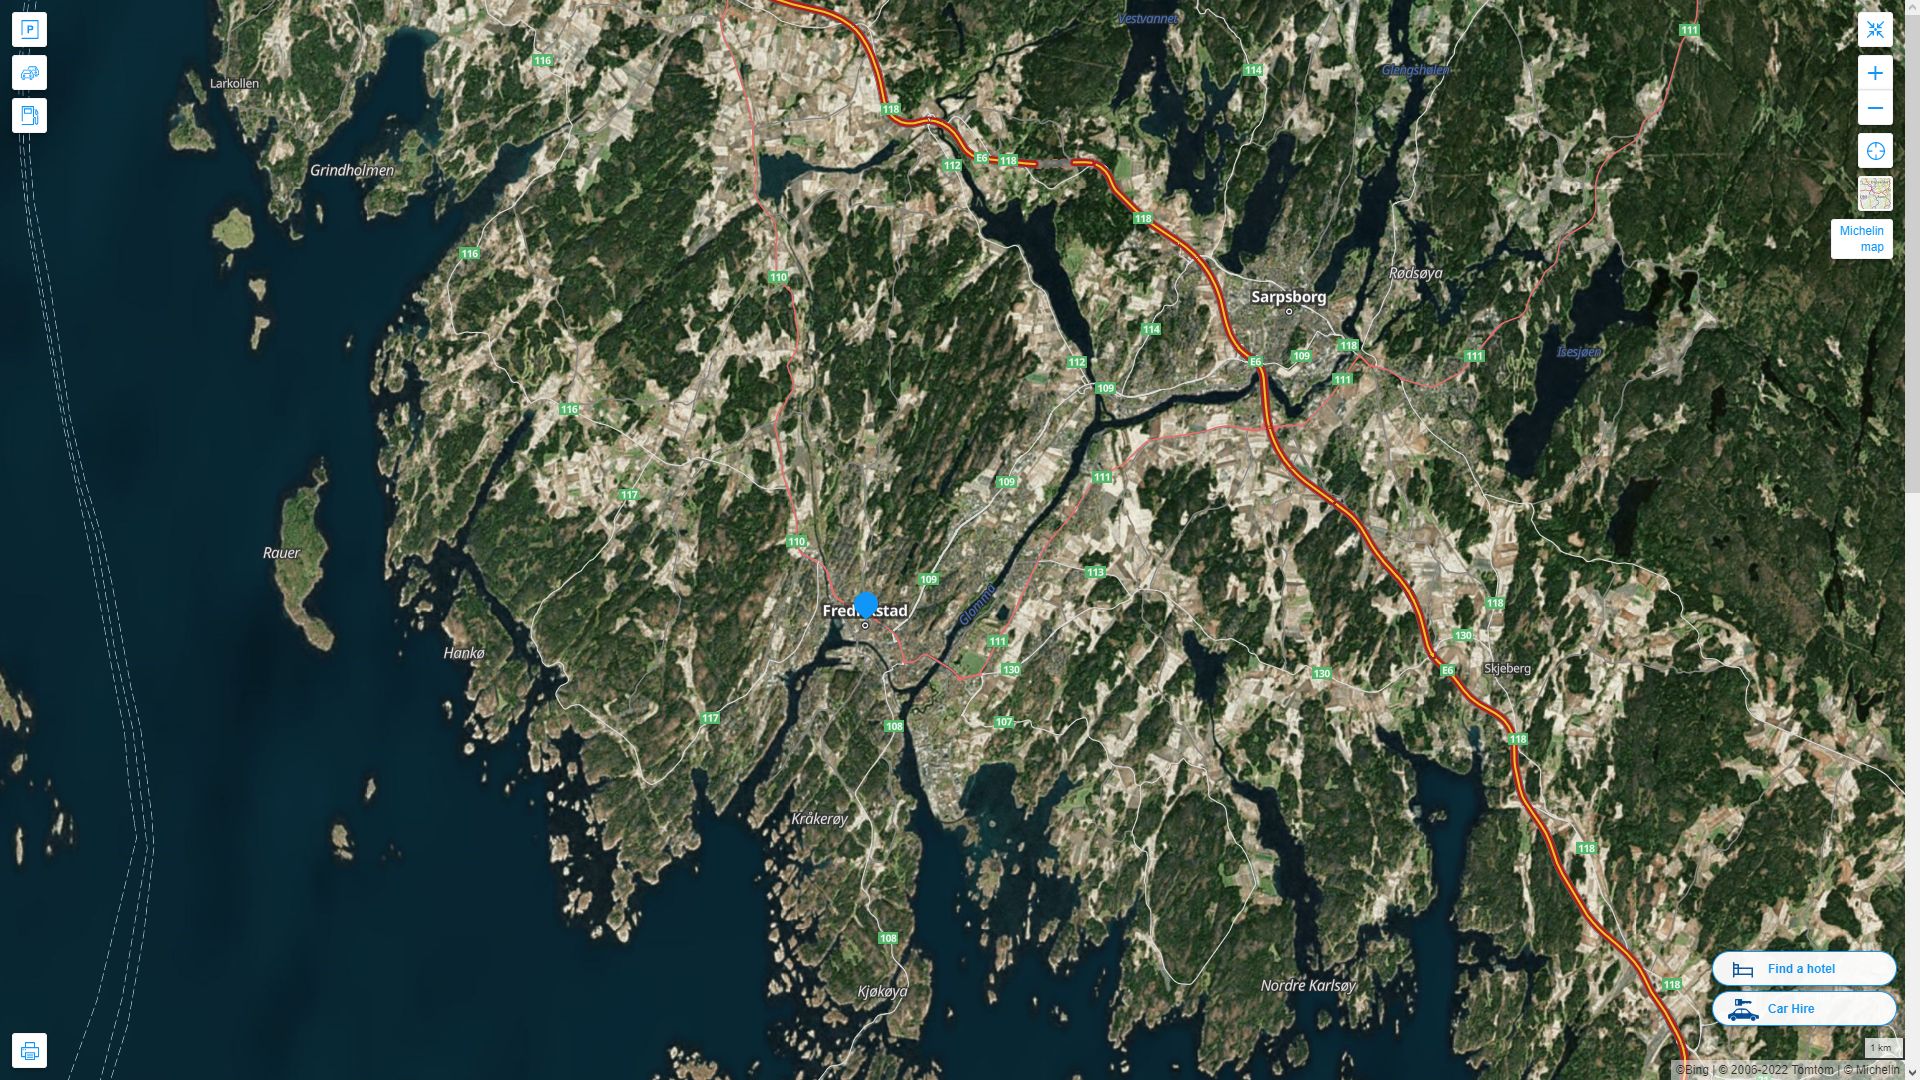 Fredrikstad Highway and Road Map with Satellite View